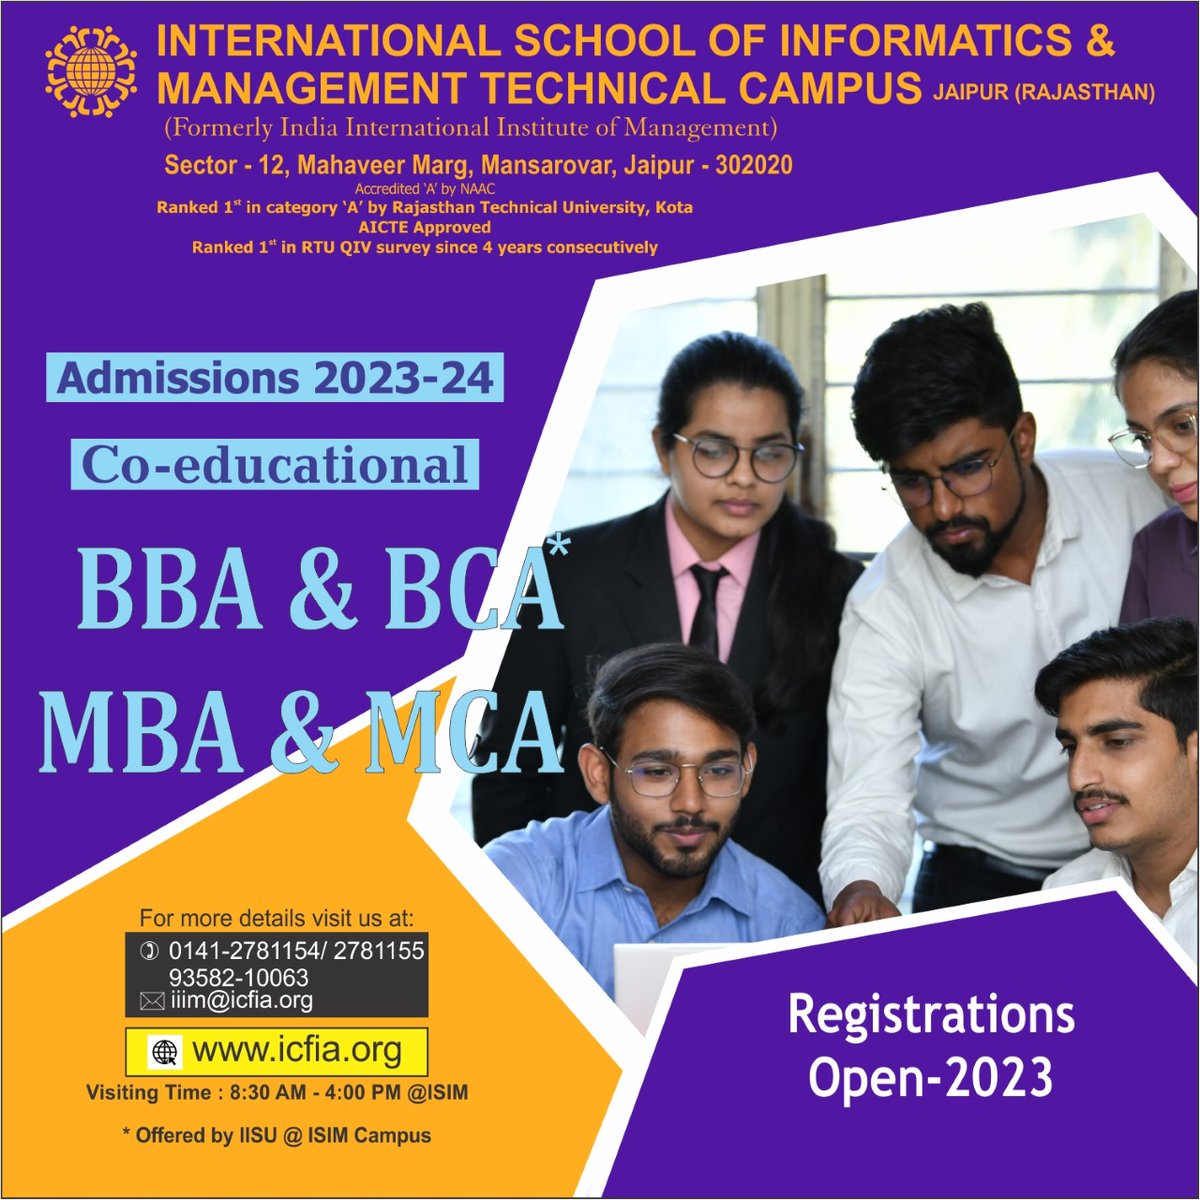 Reach us: 0141-2781154 / 0141-2781155
For inquiry :
lnkd.in/f7N3EVd

#AdmissionsOpen #admissions2023 - 24 #pgcourses #mba #MCA #ComputerApplications #CareerOpportunities #SoftwareEngineer #DatabaseAdministrator #NetworkAdministrator #SystemAdministrator #WebDeveloper